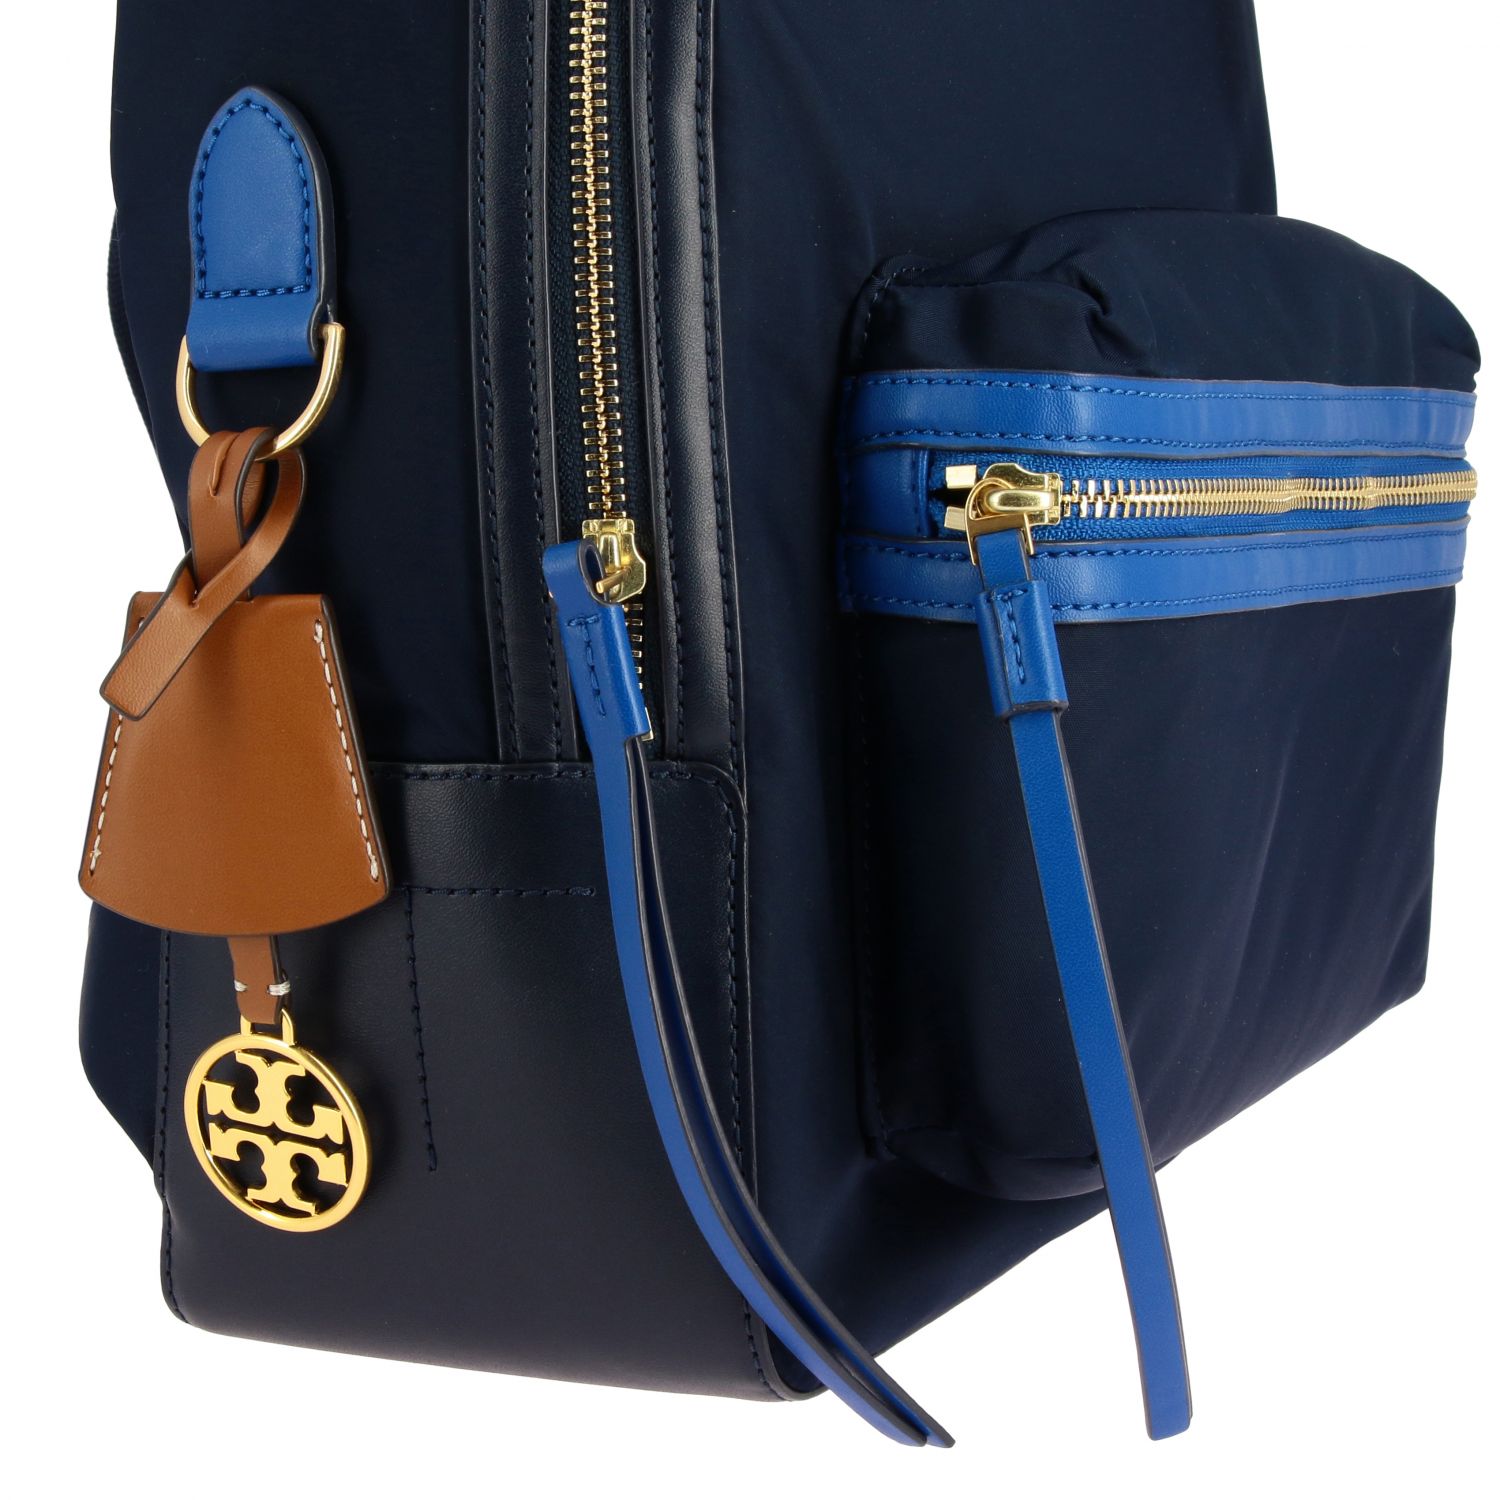 Tory Burch Outlet: backpack for women - Blue | Tory Burch backpack 58400  online on 